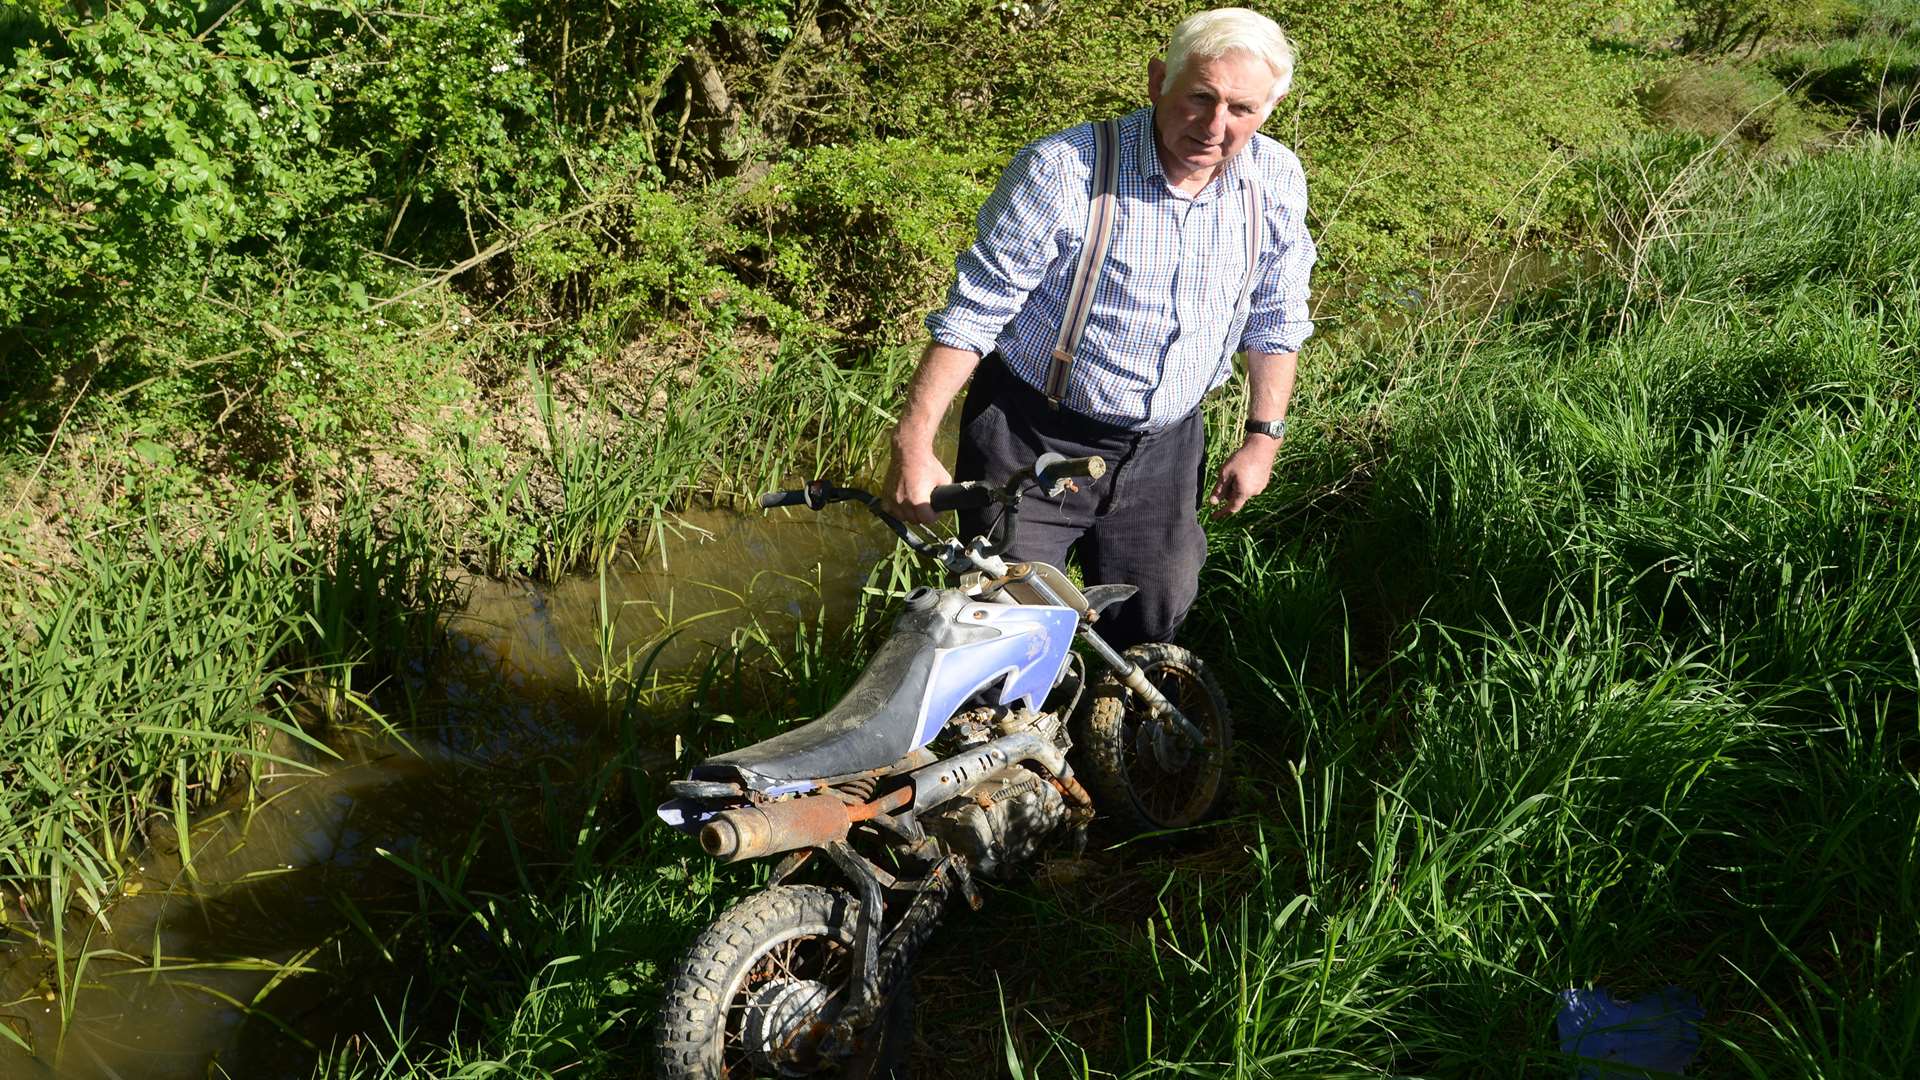 Mr Homewood with the motorbike dumped in a ditch on his farm